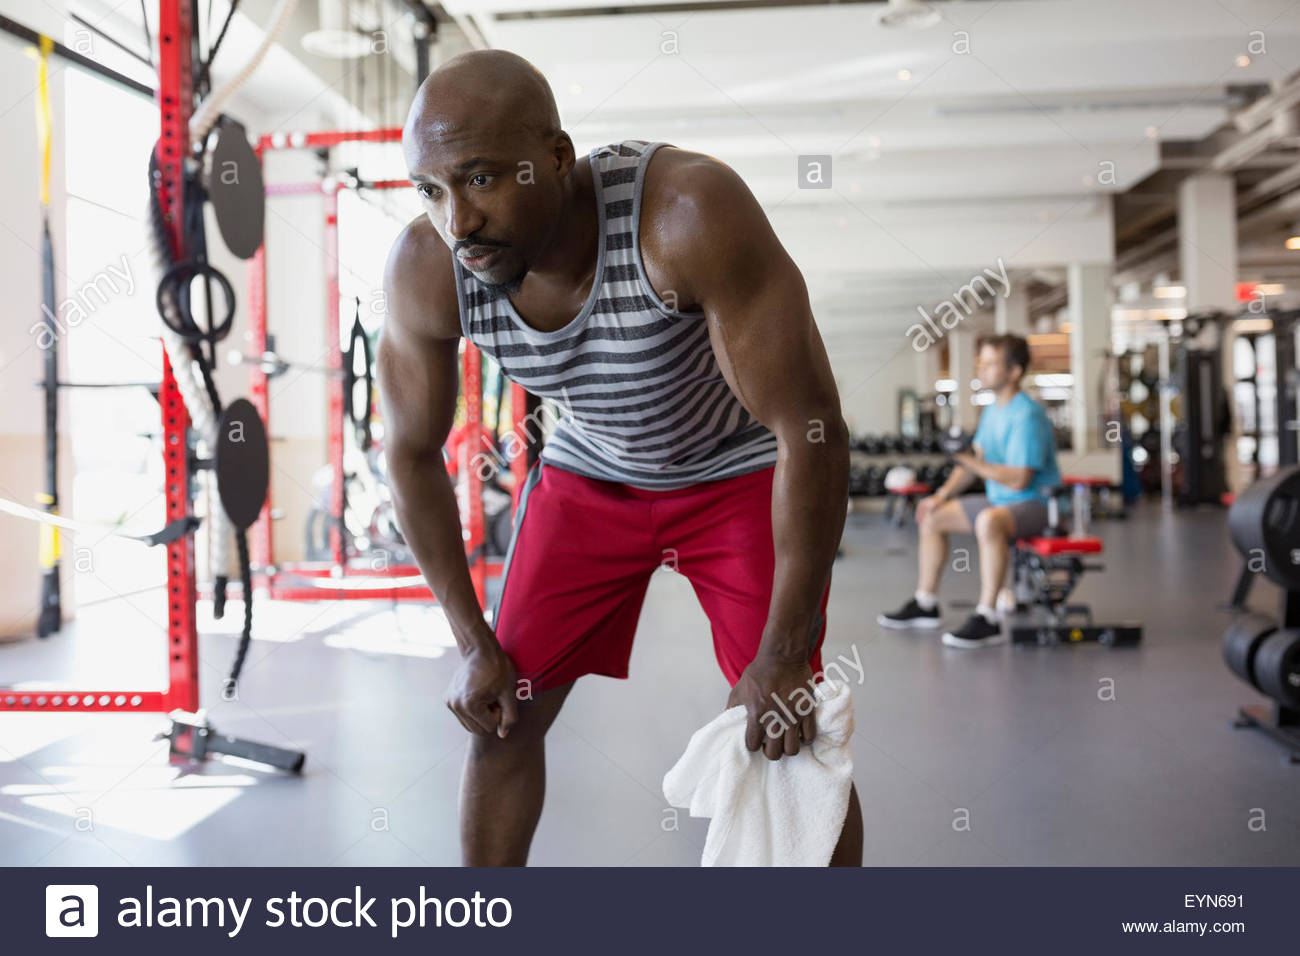 Tired man resting with hands on knees at gym Stock Photo